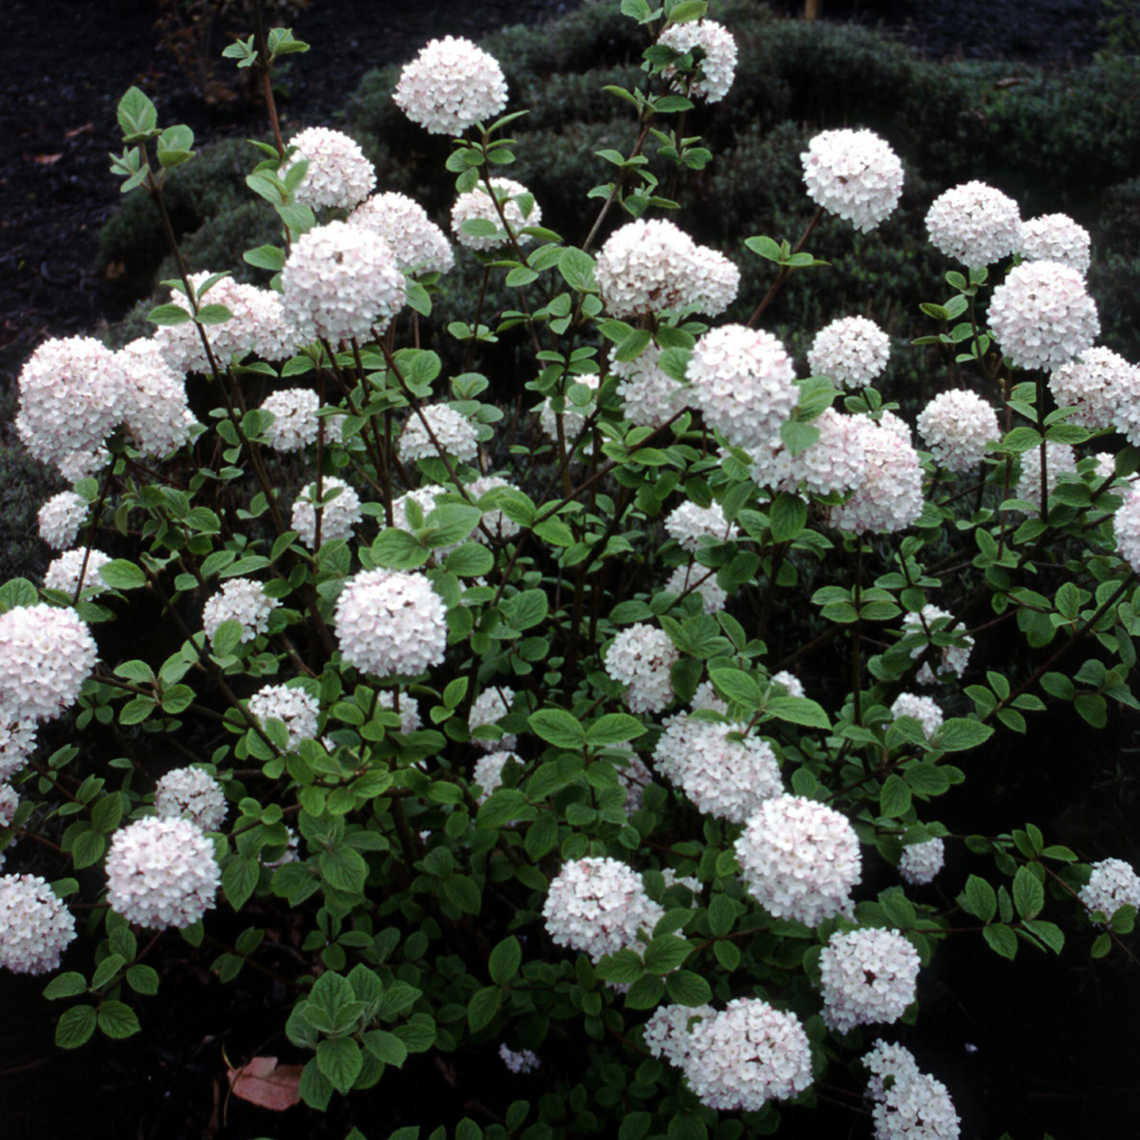 Viburnum carlesii blooming in a landscape with large white snowball like flowers